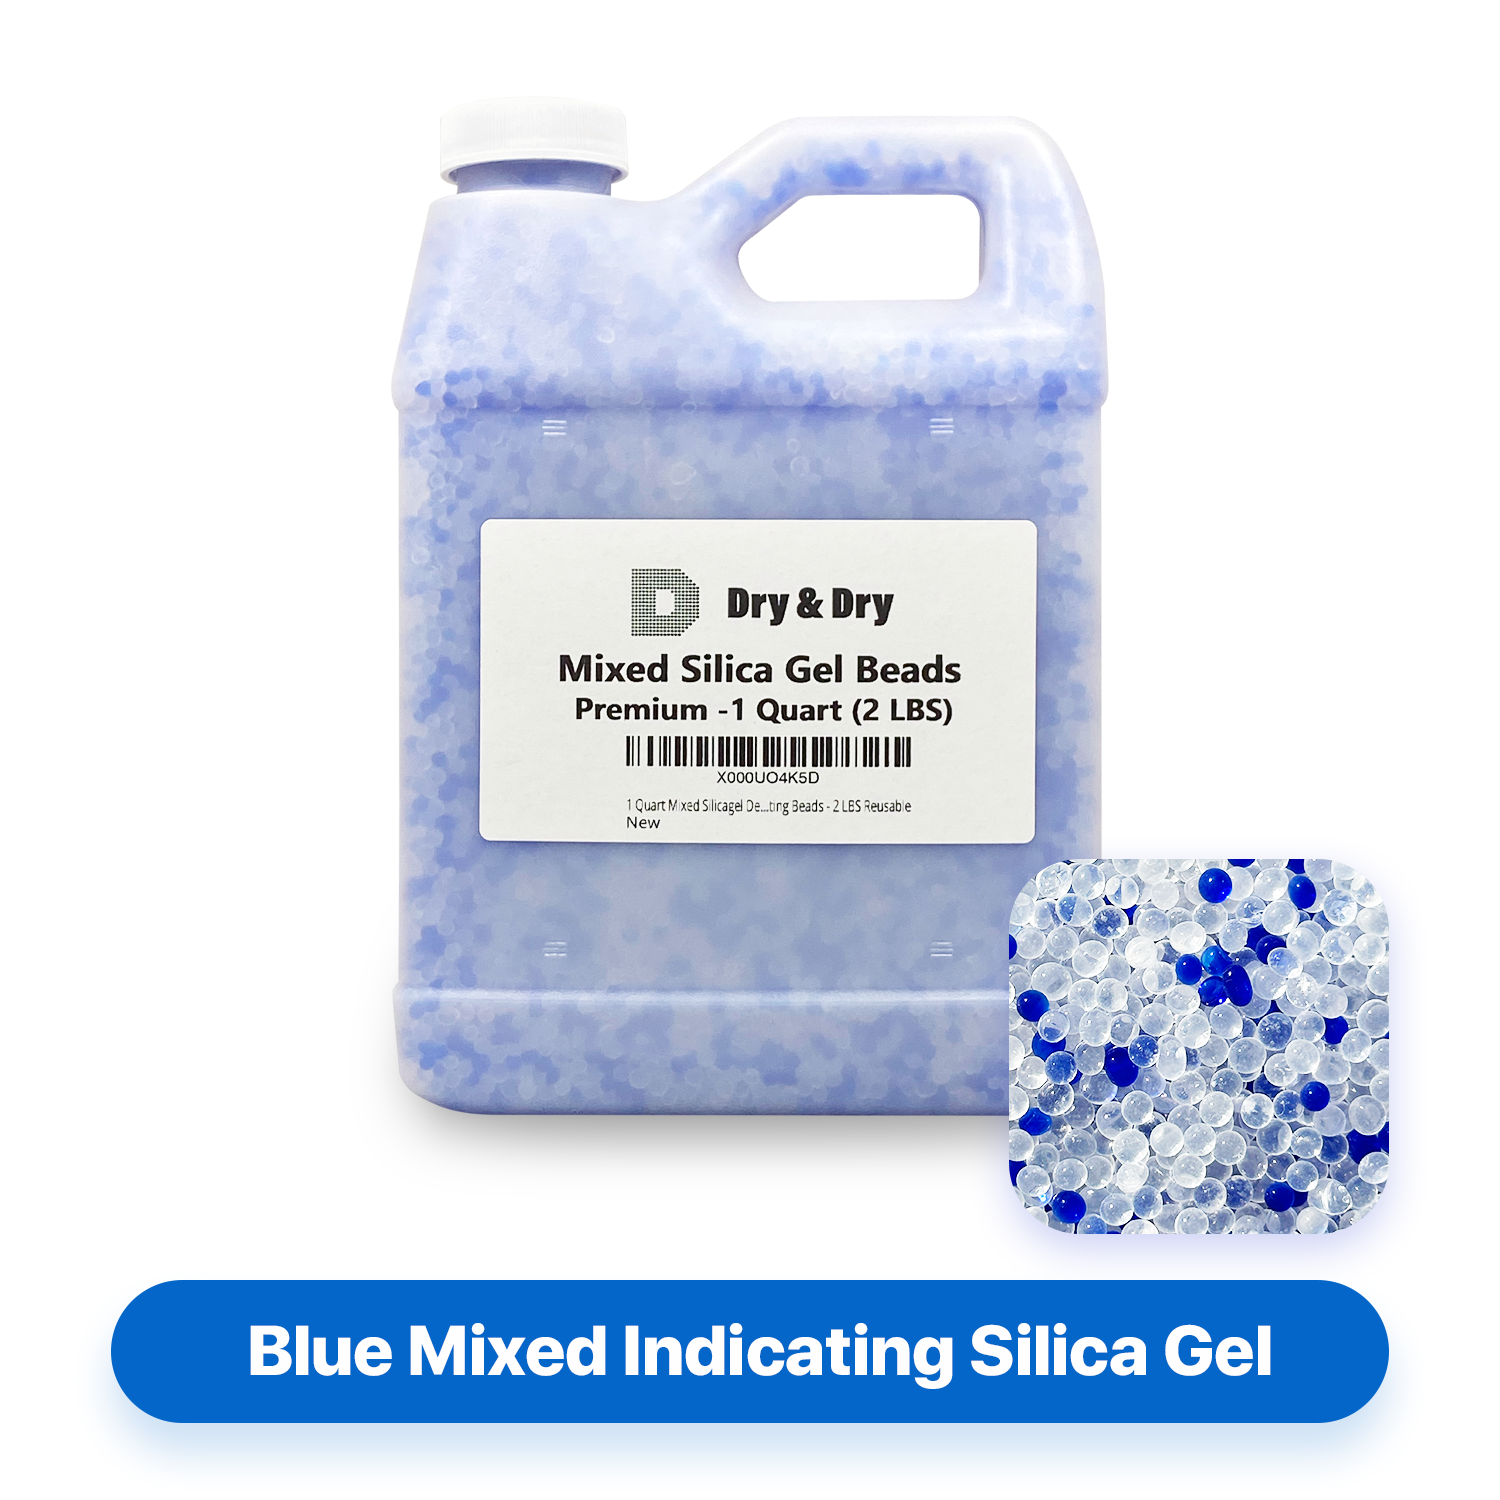 10 LBS Dry & Dry Premium White Silica Gel Beads (Industry